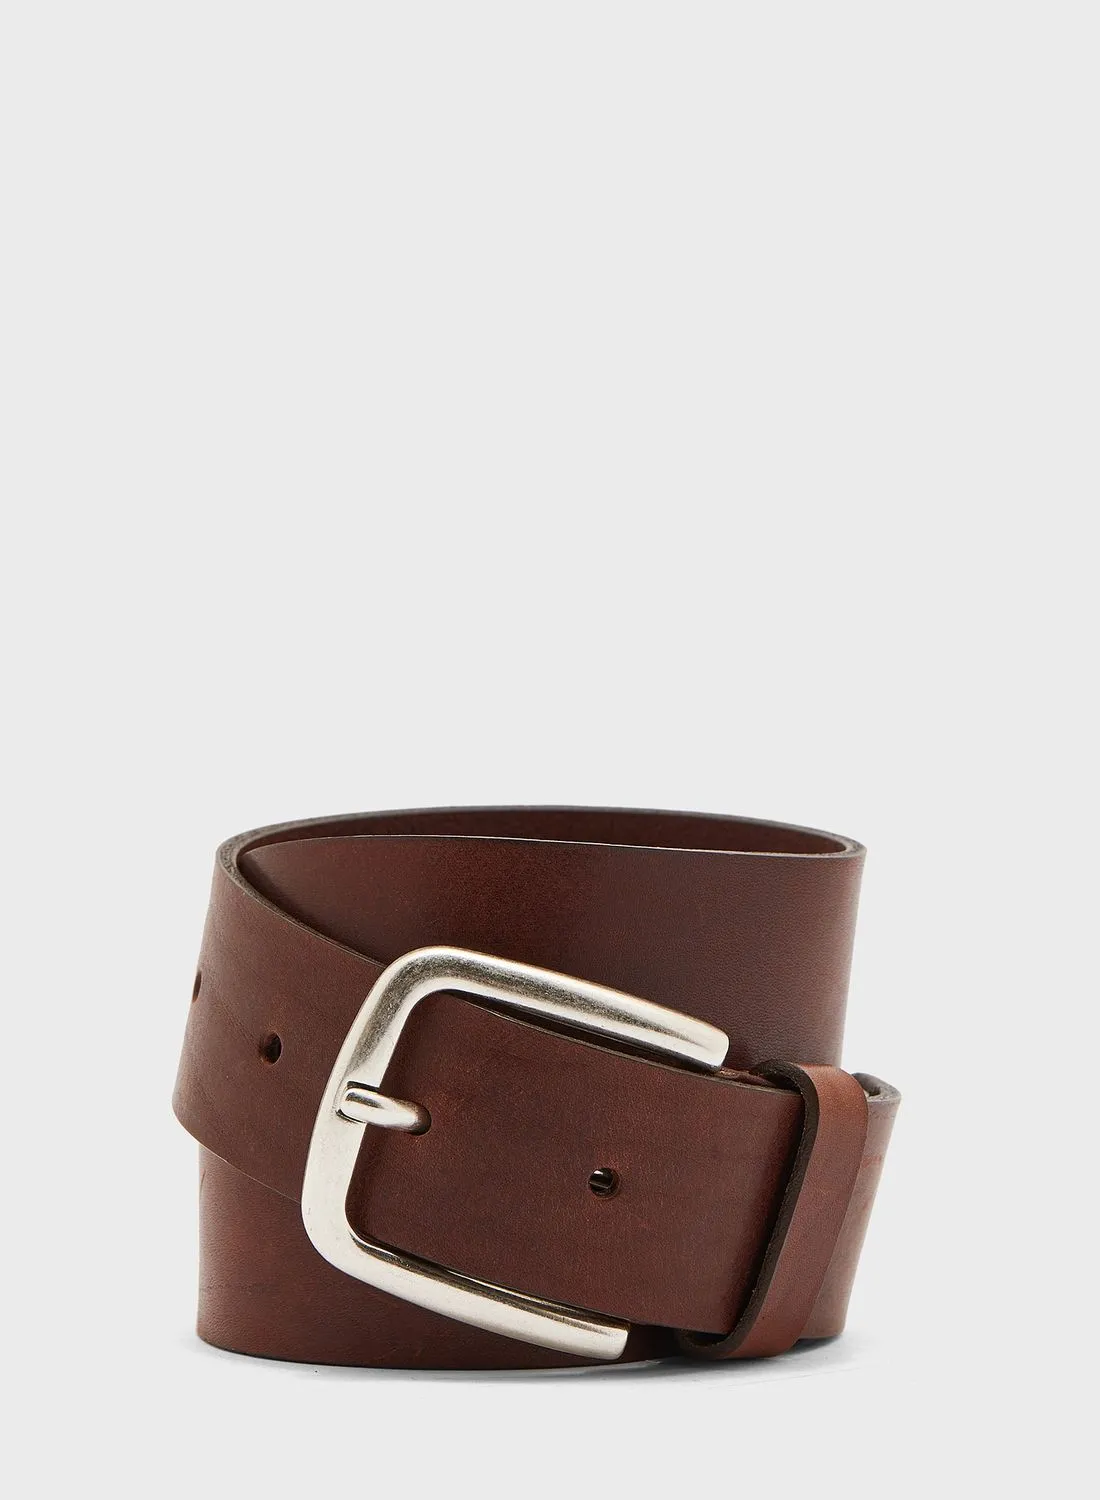 LEE Casual Allocated Hole Belt